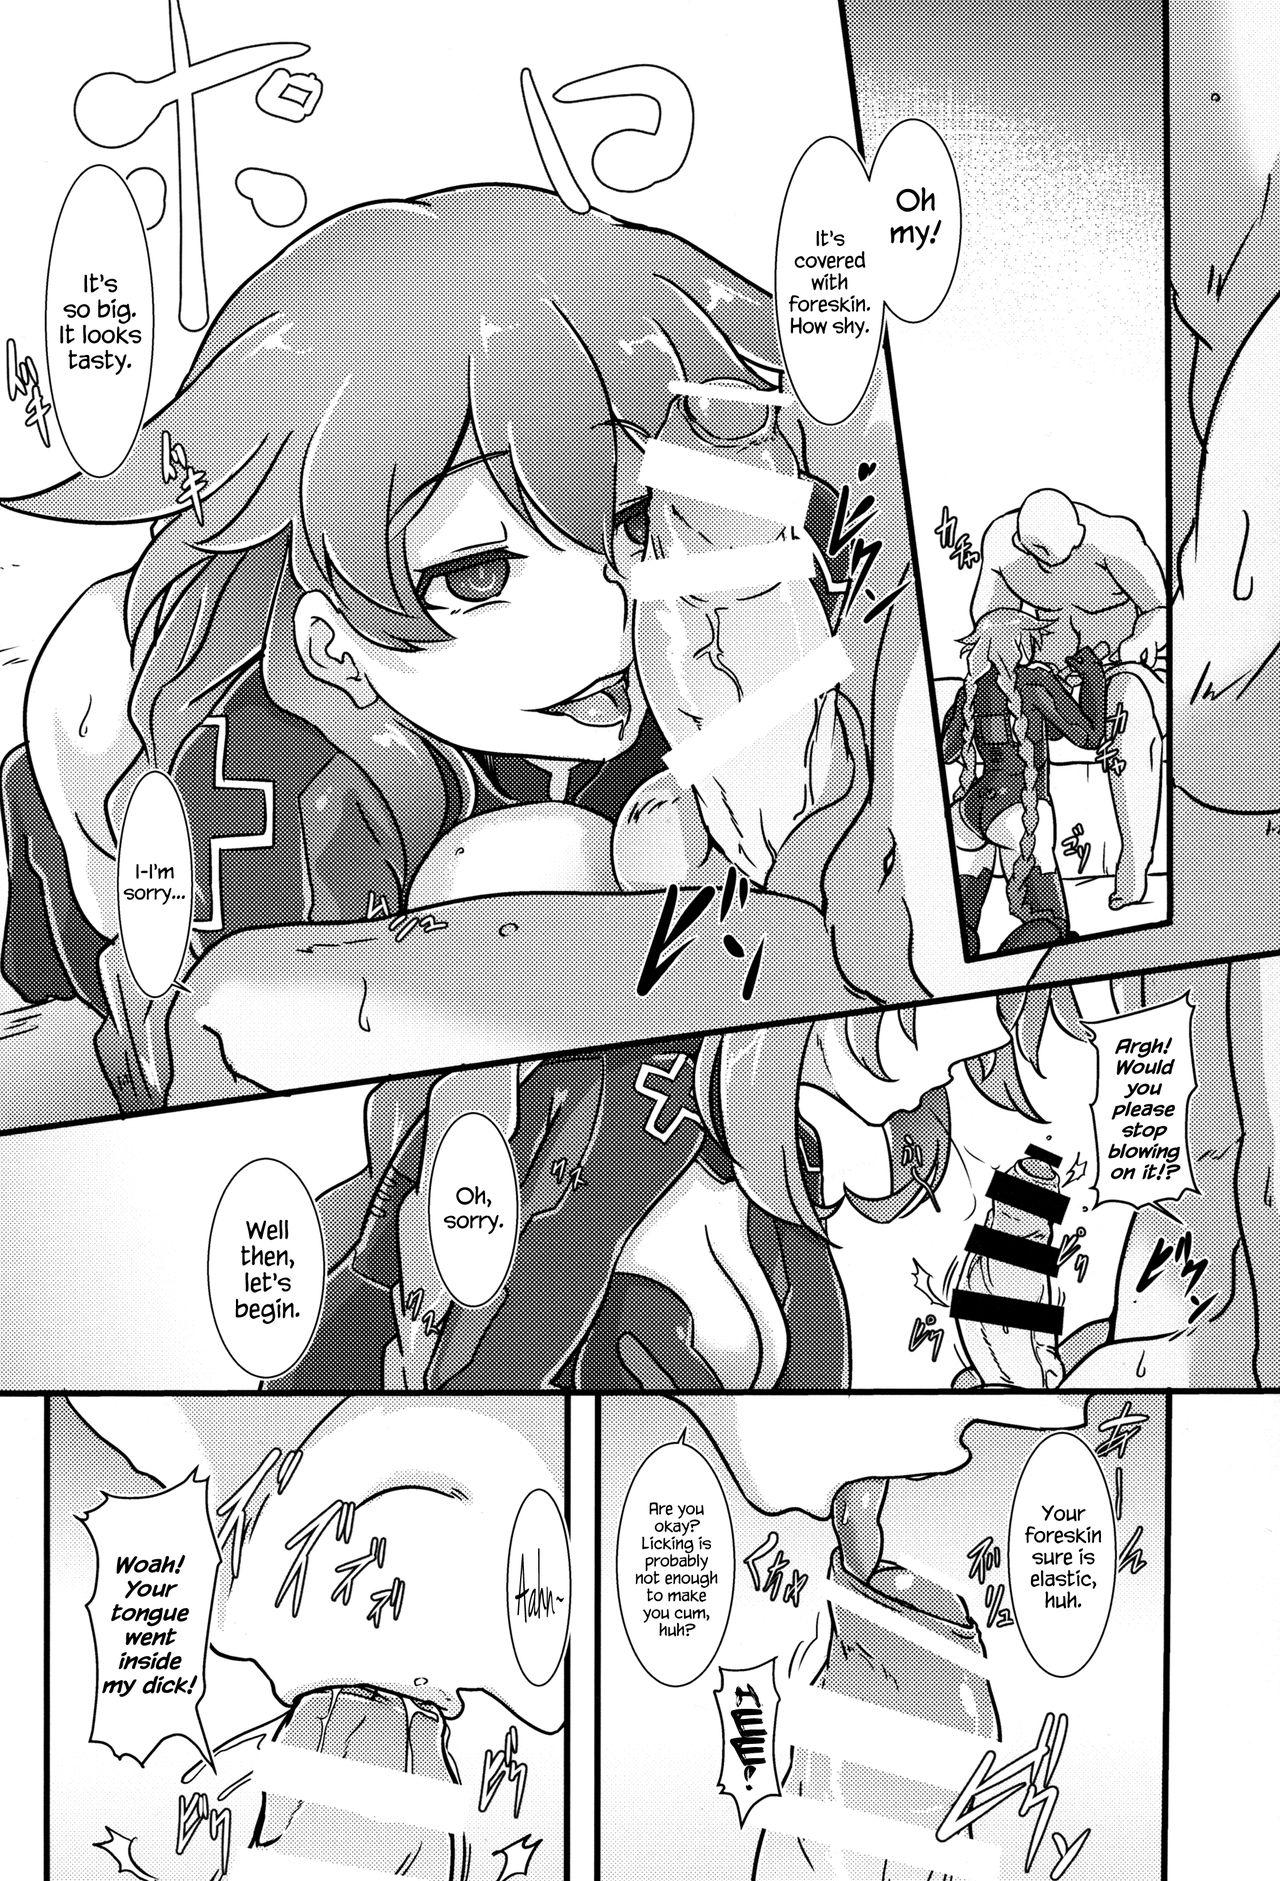 Made Nightmare from Goddess - Hyperdimension neptunia Amateurs - Page 8